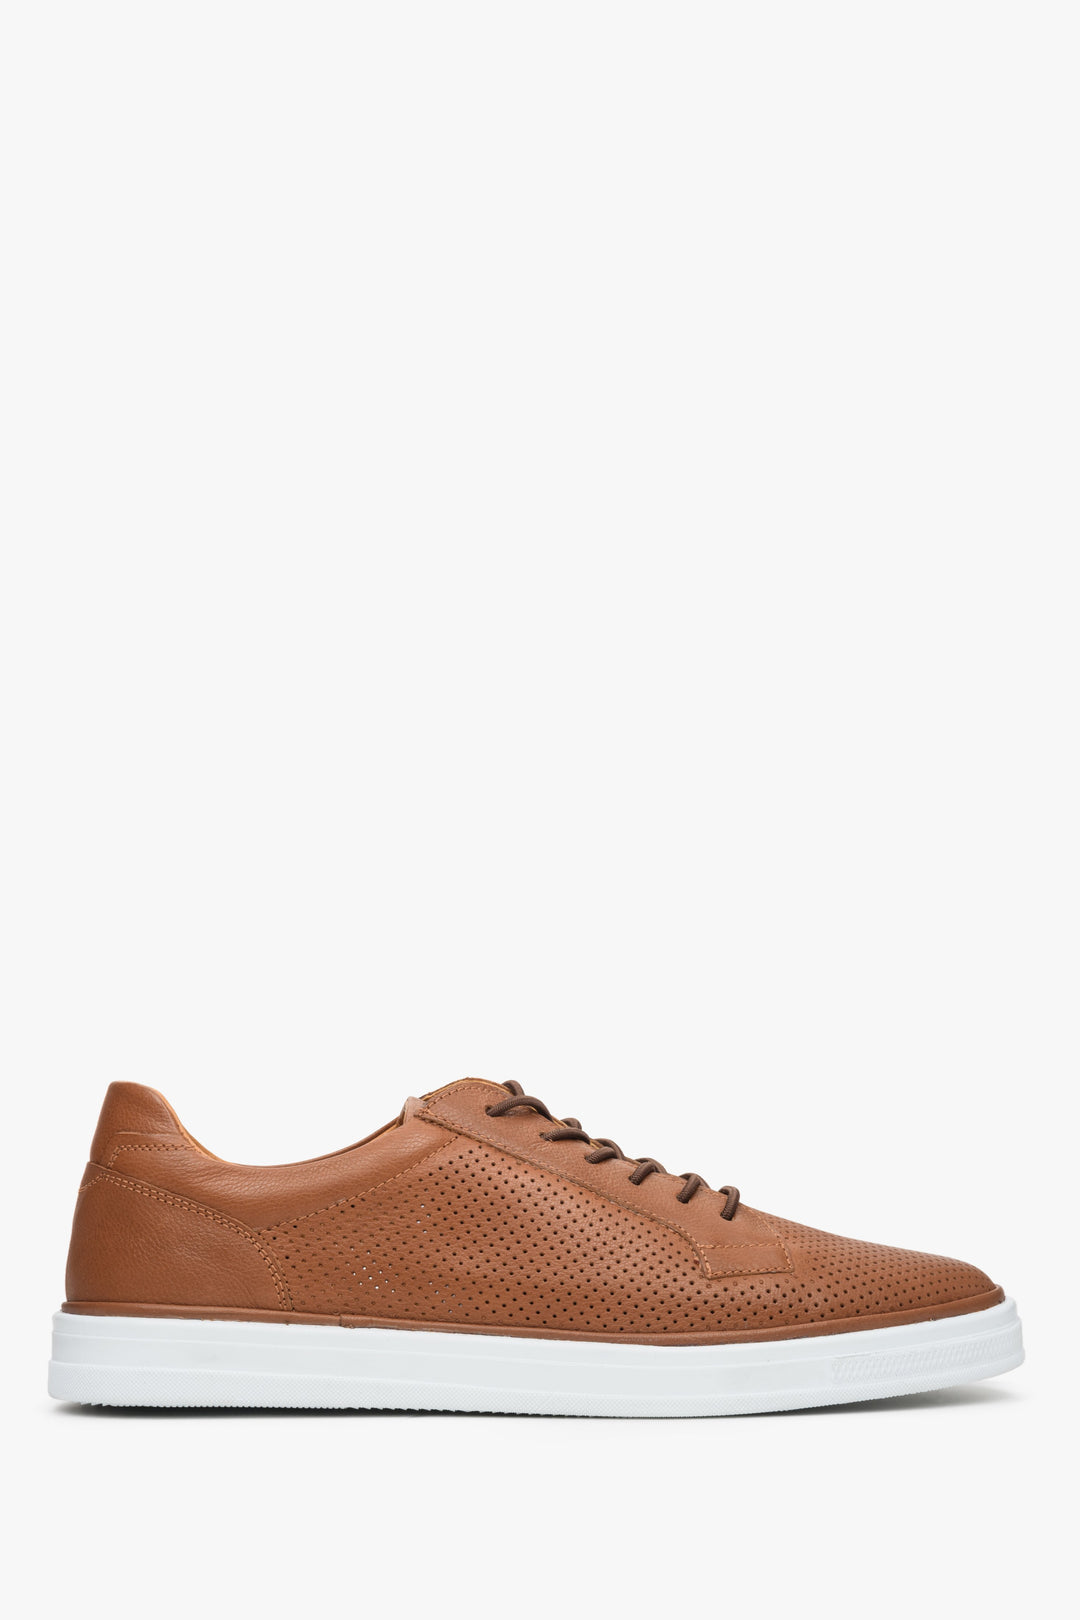 Brown Perforated Men's Leather Sneakers for Summer Estro ER00112900